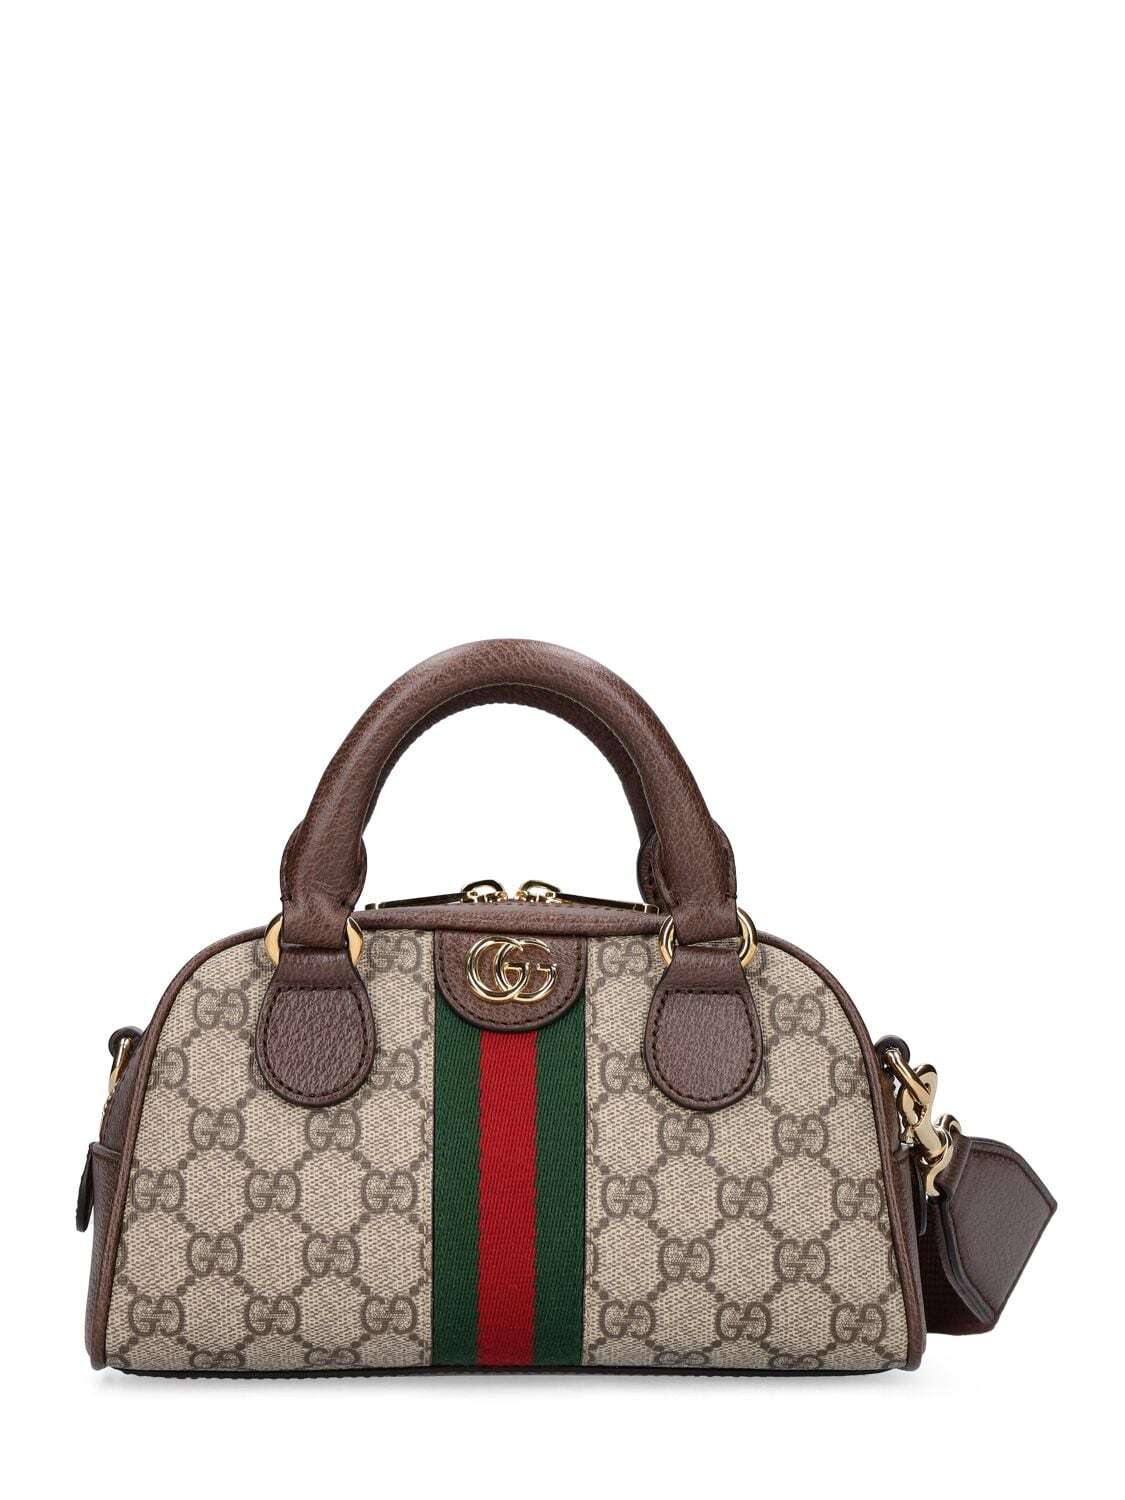 GUCCI Supreme Gg Canvas Top Handle Bag in brown / beige